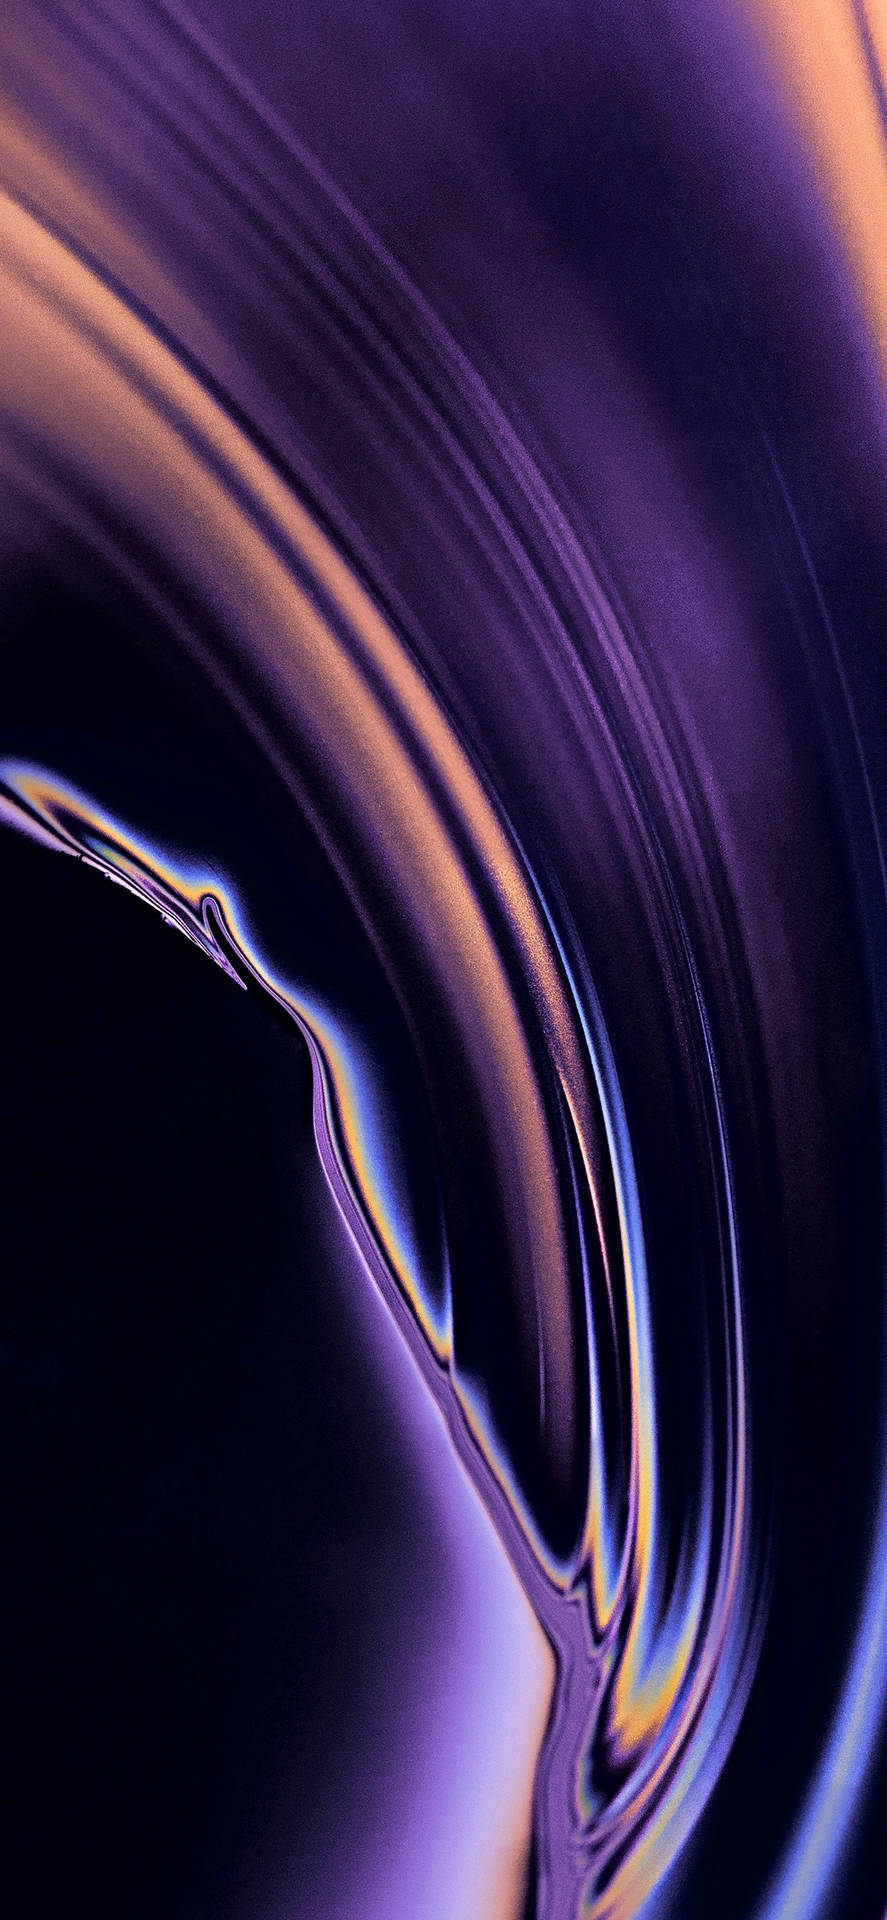 Spinning Water Abstract Iphone Wallpaper